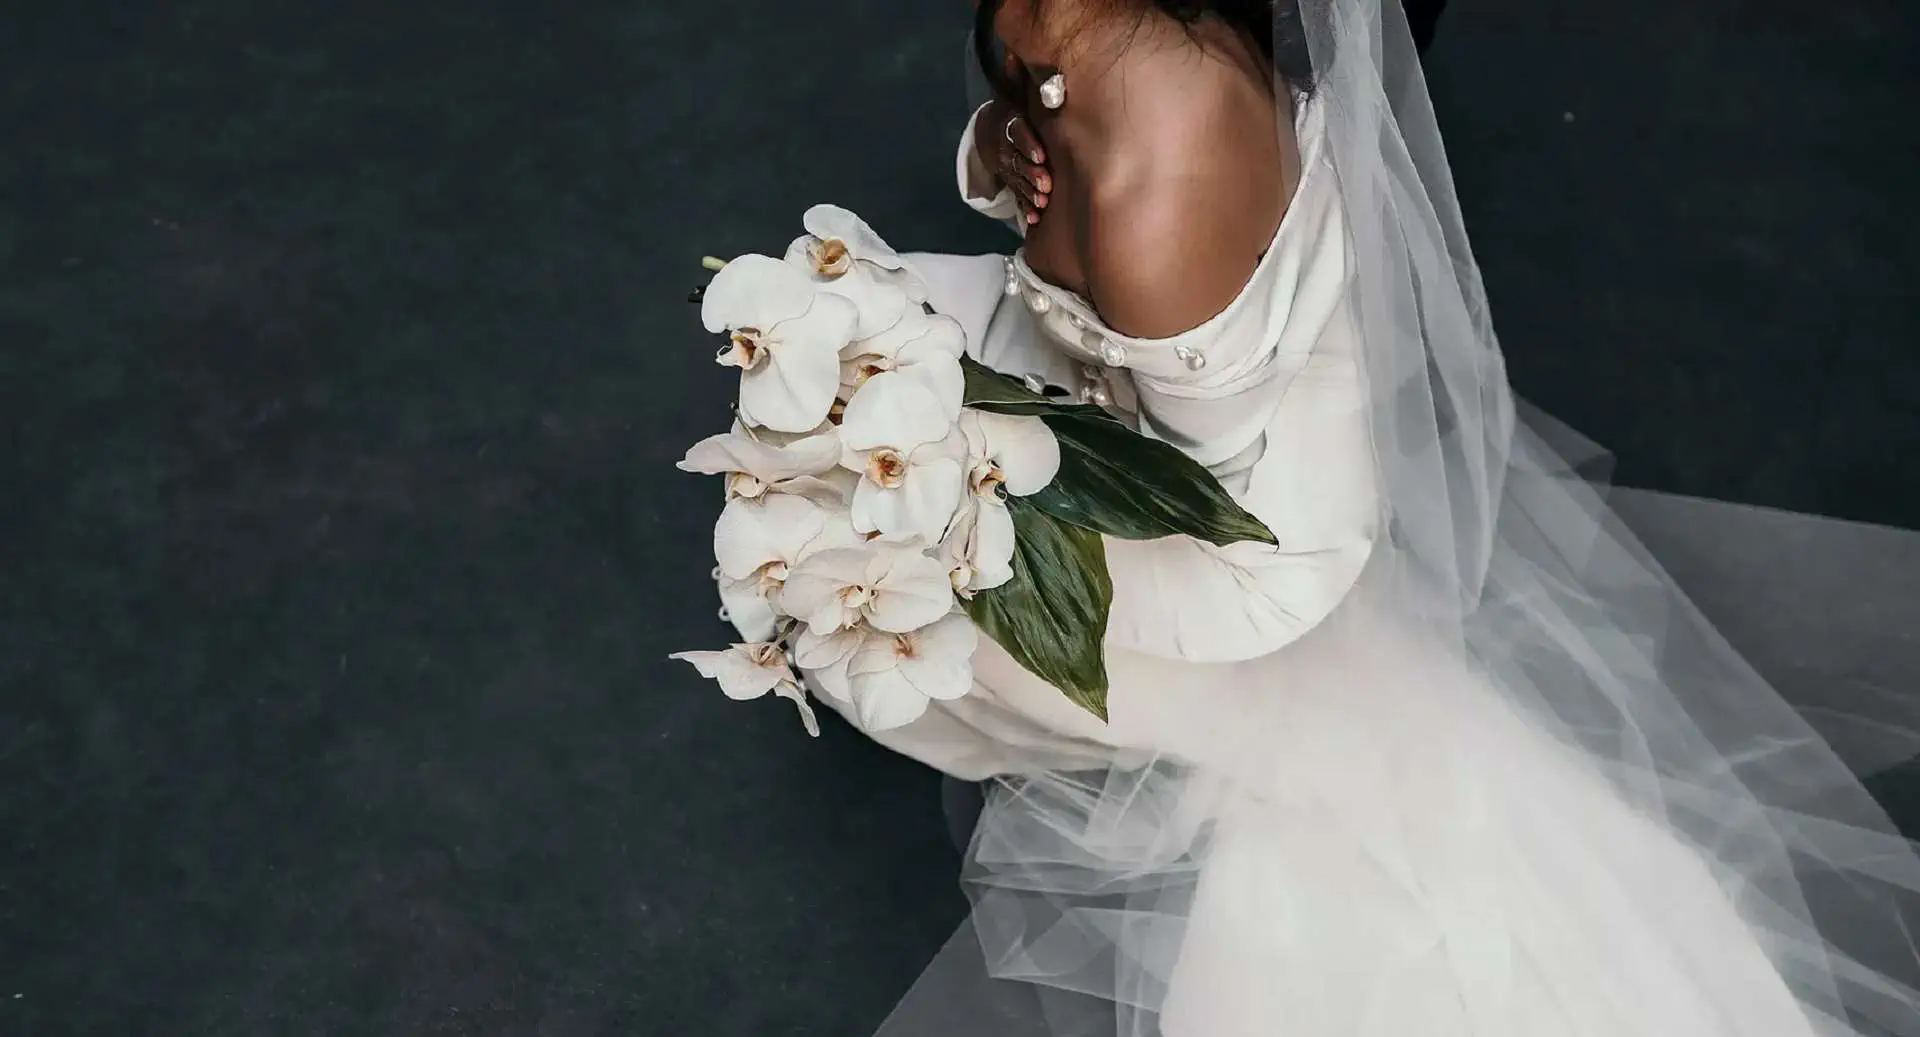 WHAT IT MEANS TO BE A MODERN BRIDE